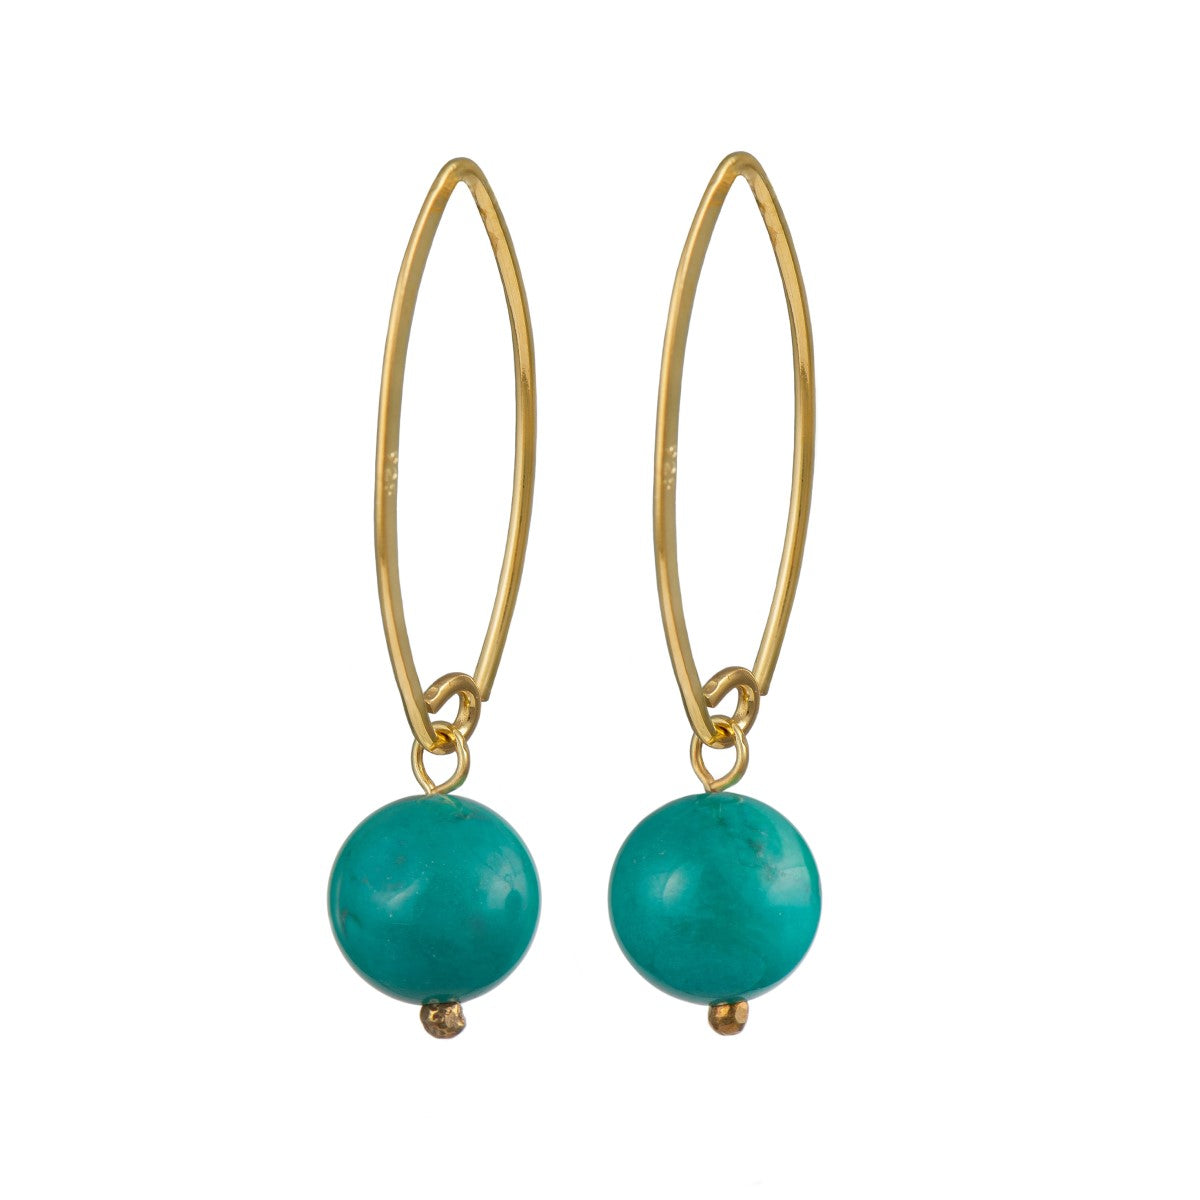 Gold Plated Sterling Silver Threader Earrings - Turquoise Drop